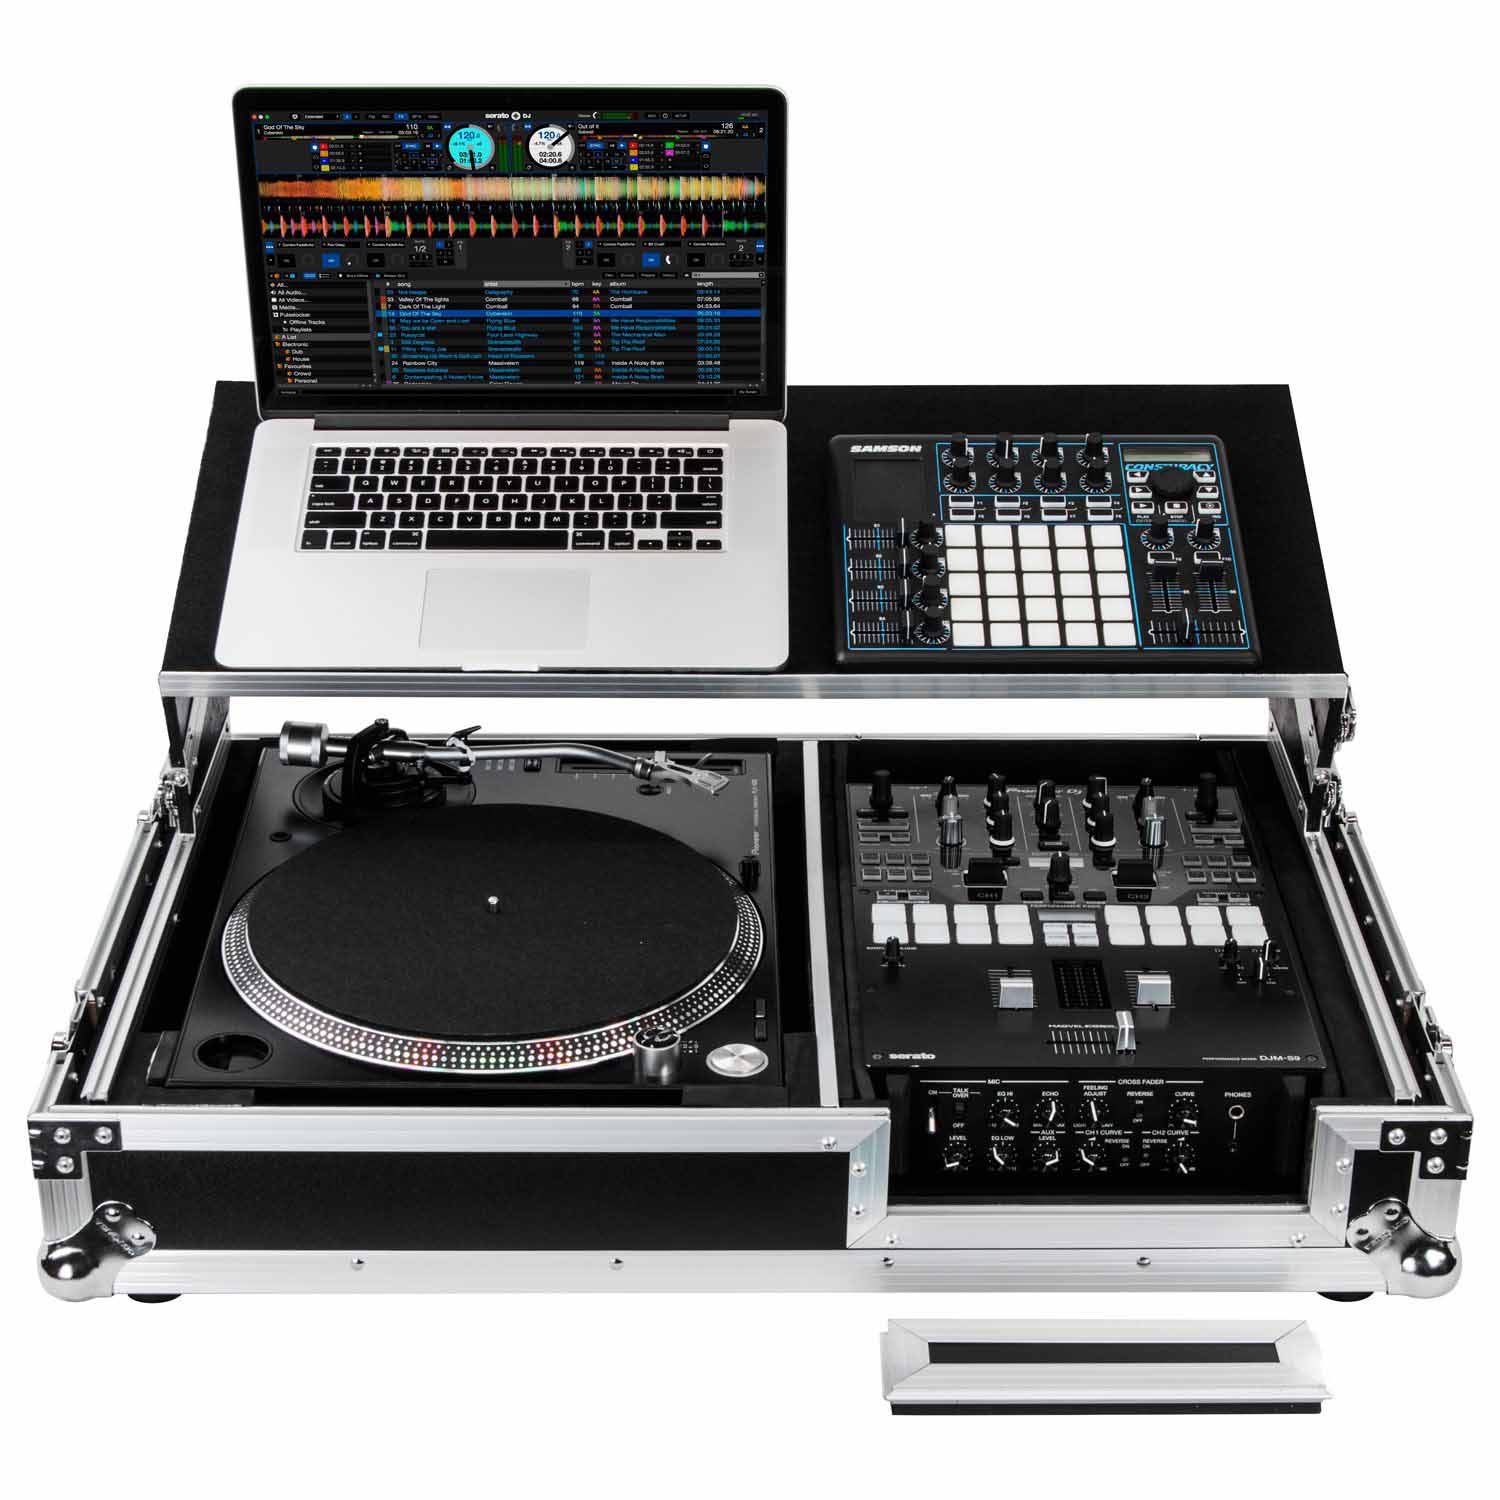 Odyssey FZGS1BM10W Reversible 10″ Format DJ Mixer and One Battle Position Turntable Coffin Flight Case with Glide Platform - Hollywood DJ